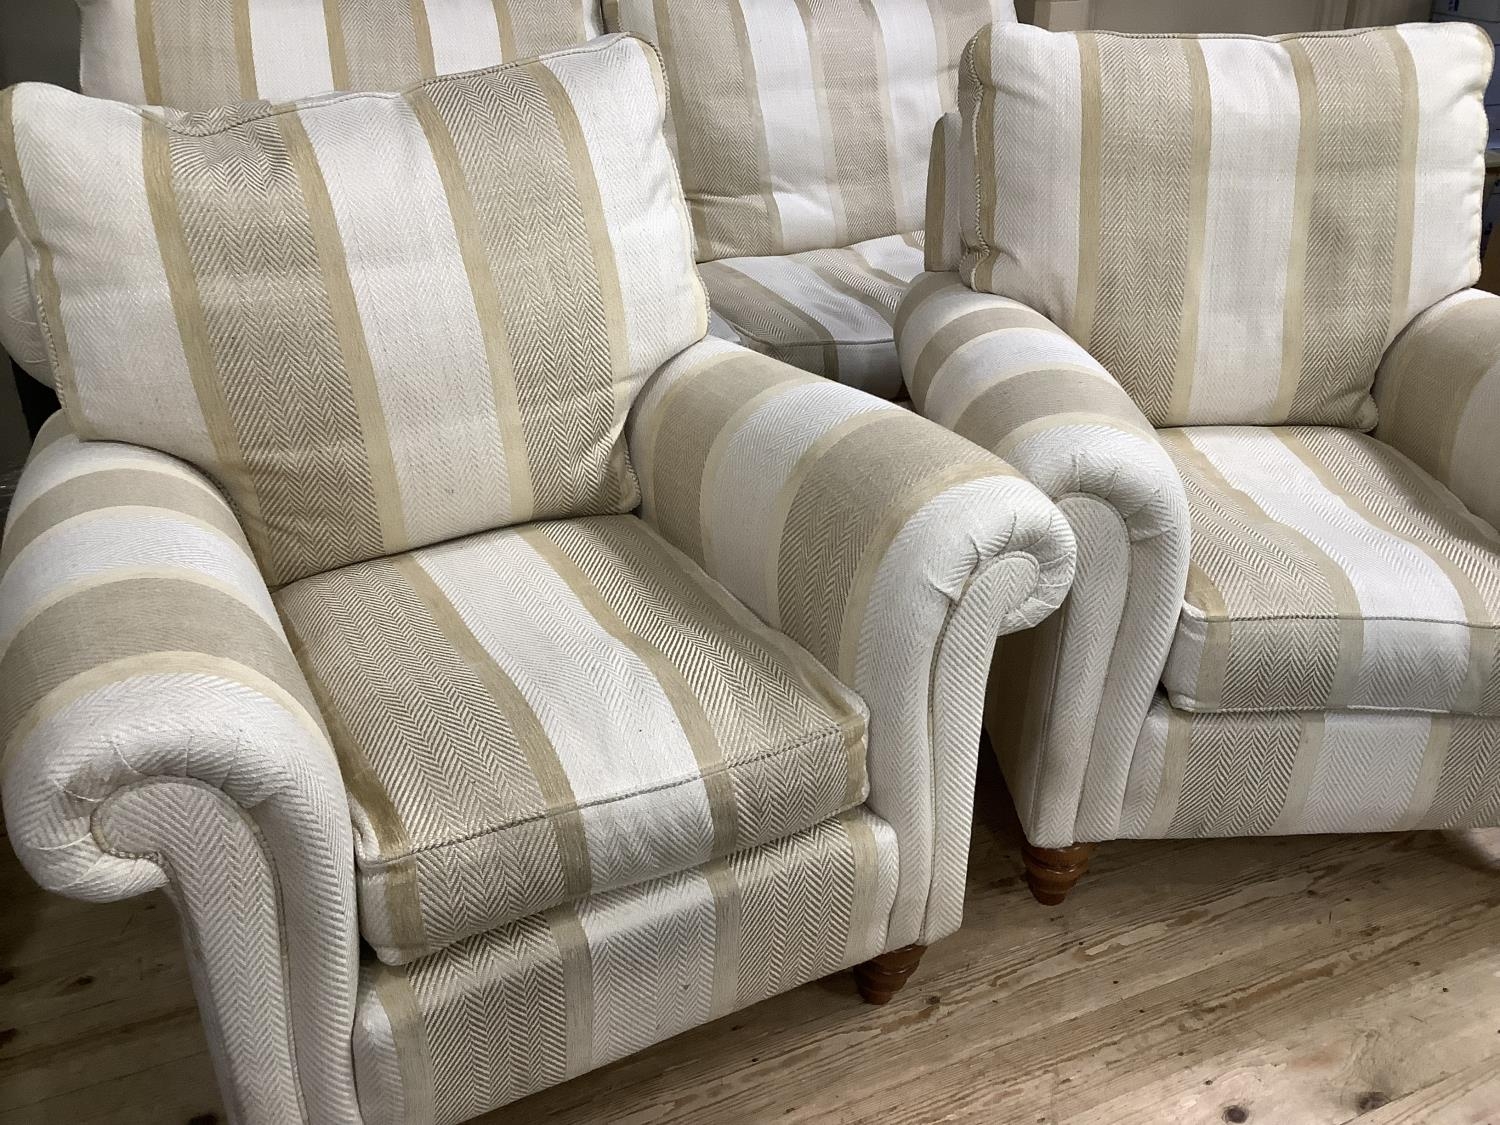 A Duresta three seater sofa upholstered in ecru and cream herringbone fabric together with two - Image 8 of 12